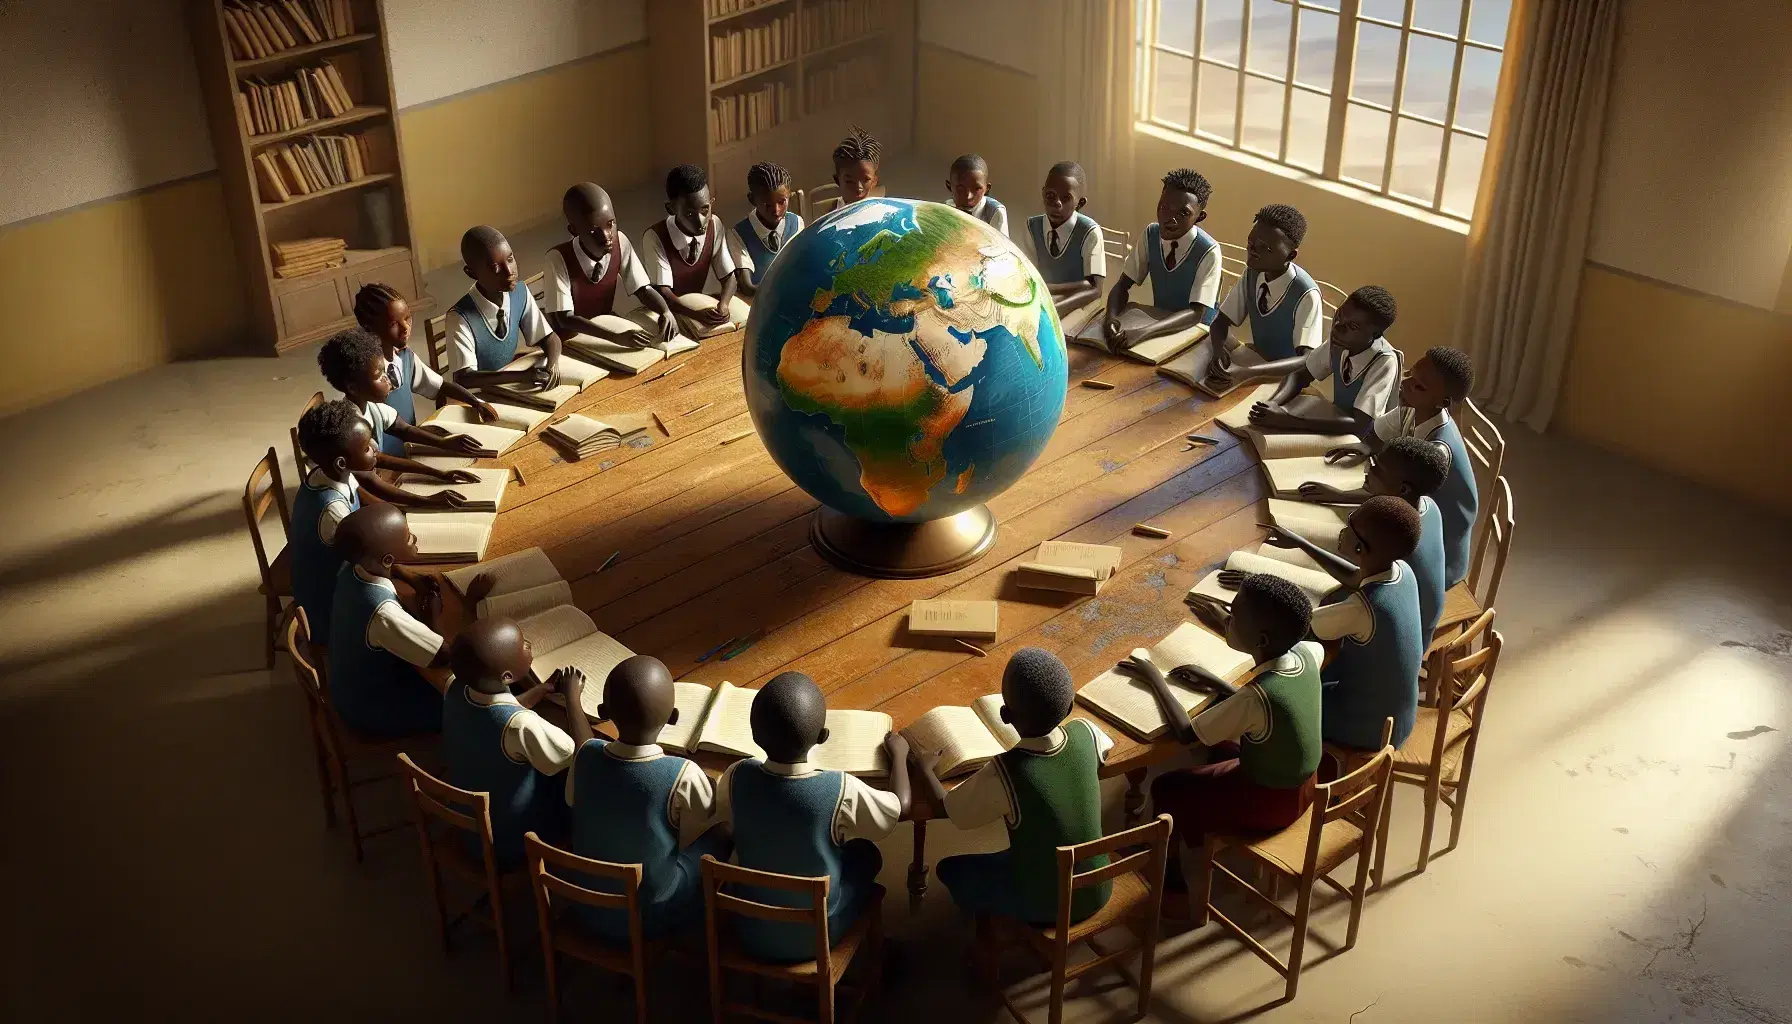 African schoolchildren in colorful uniforms engage in a discussion around a table with a label-free globe centered on Africa, in a sunlit classroom.